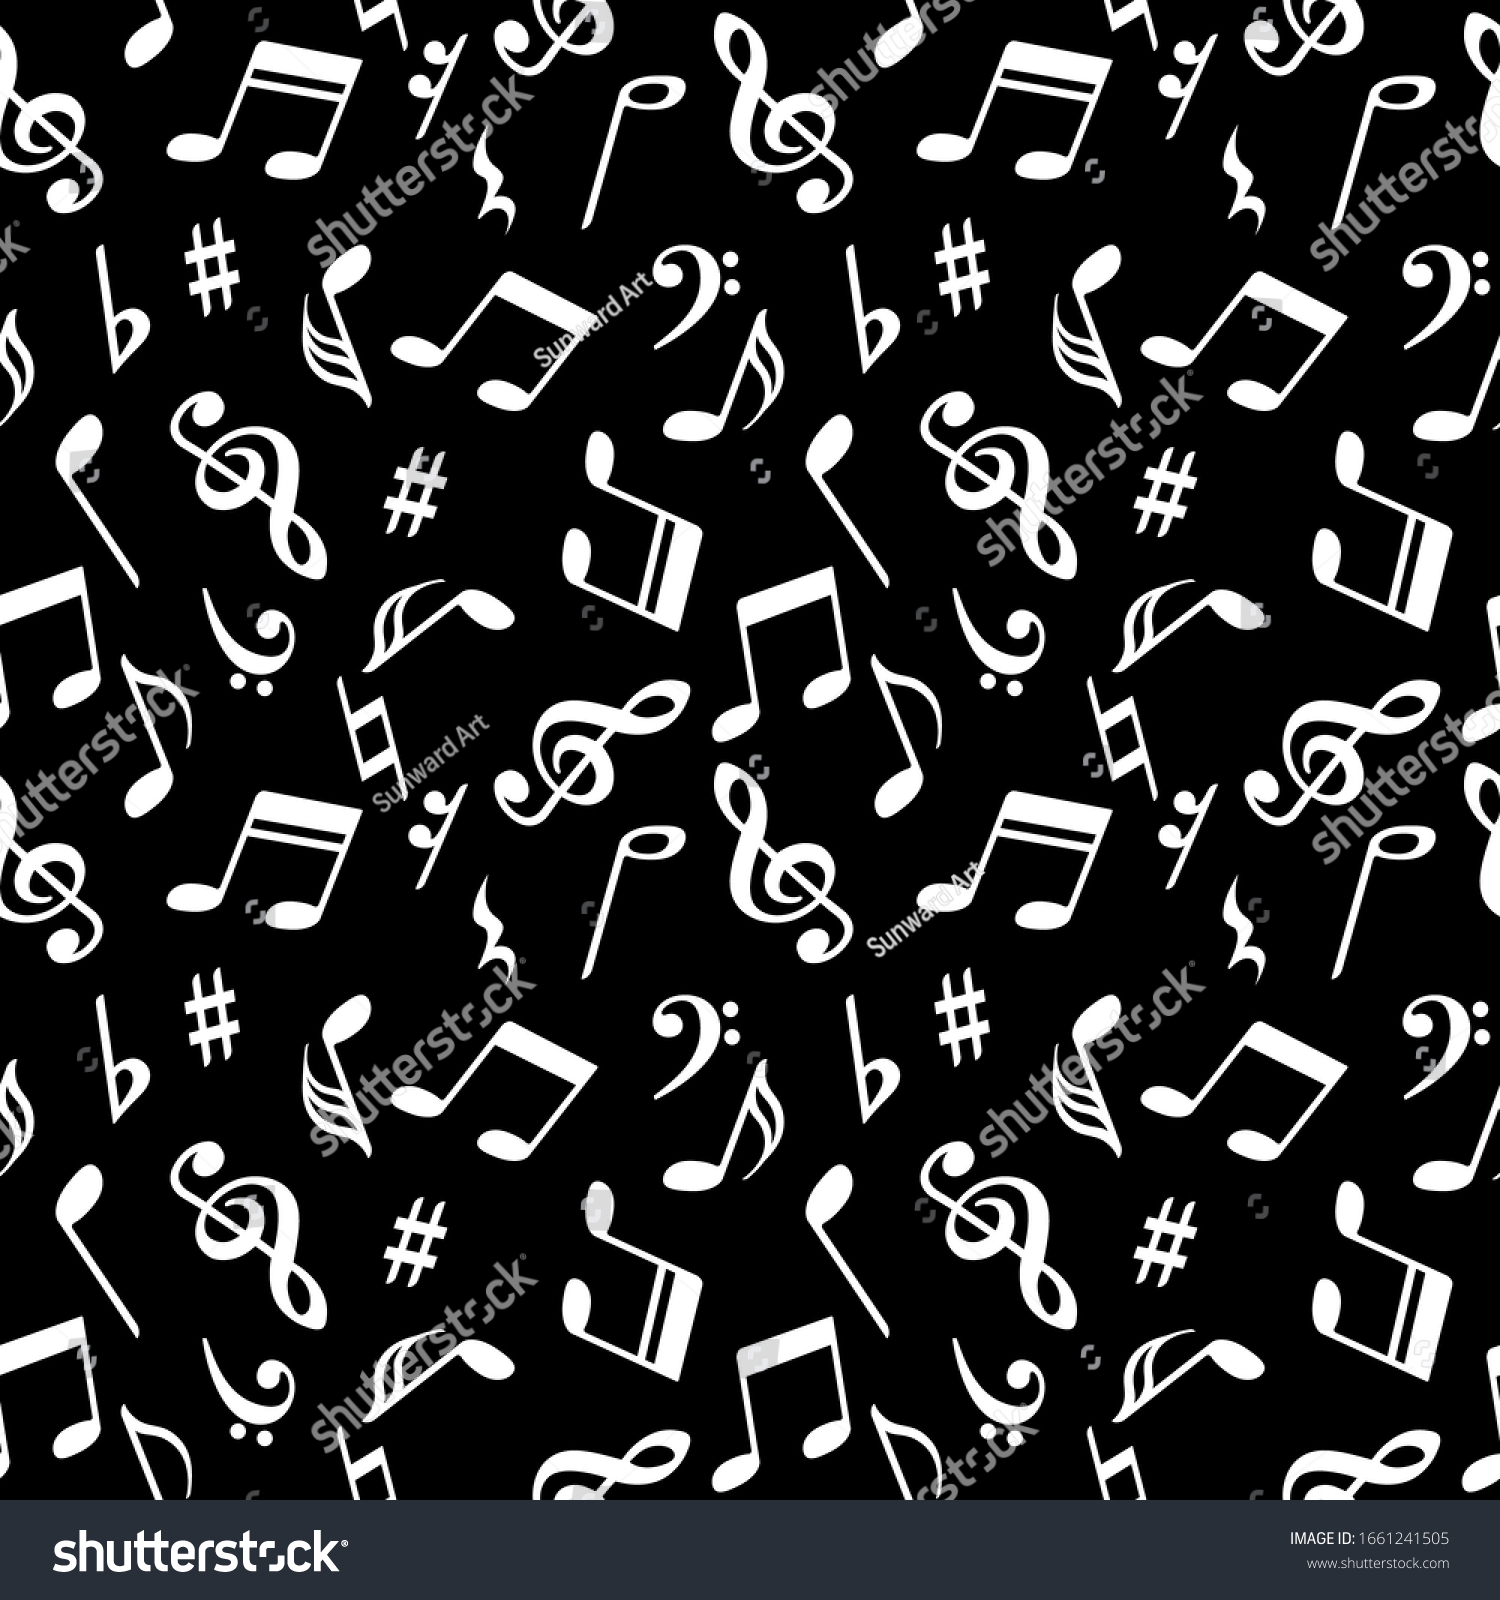 Black White Musical Notes Seamless Pattern Stock Vector (Royalty Free ...